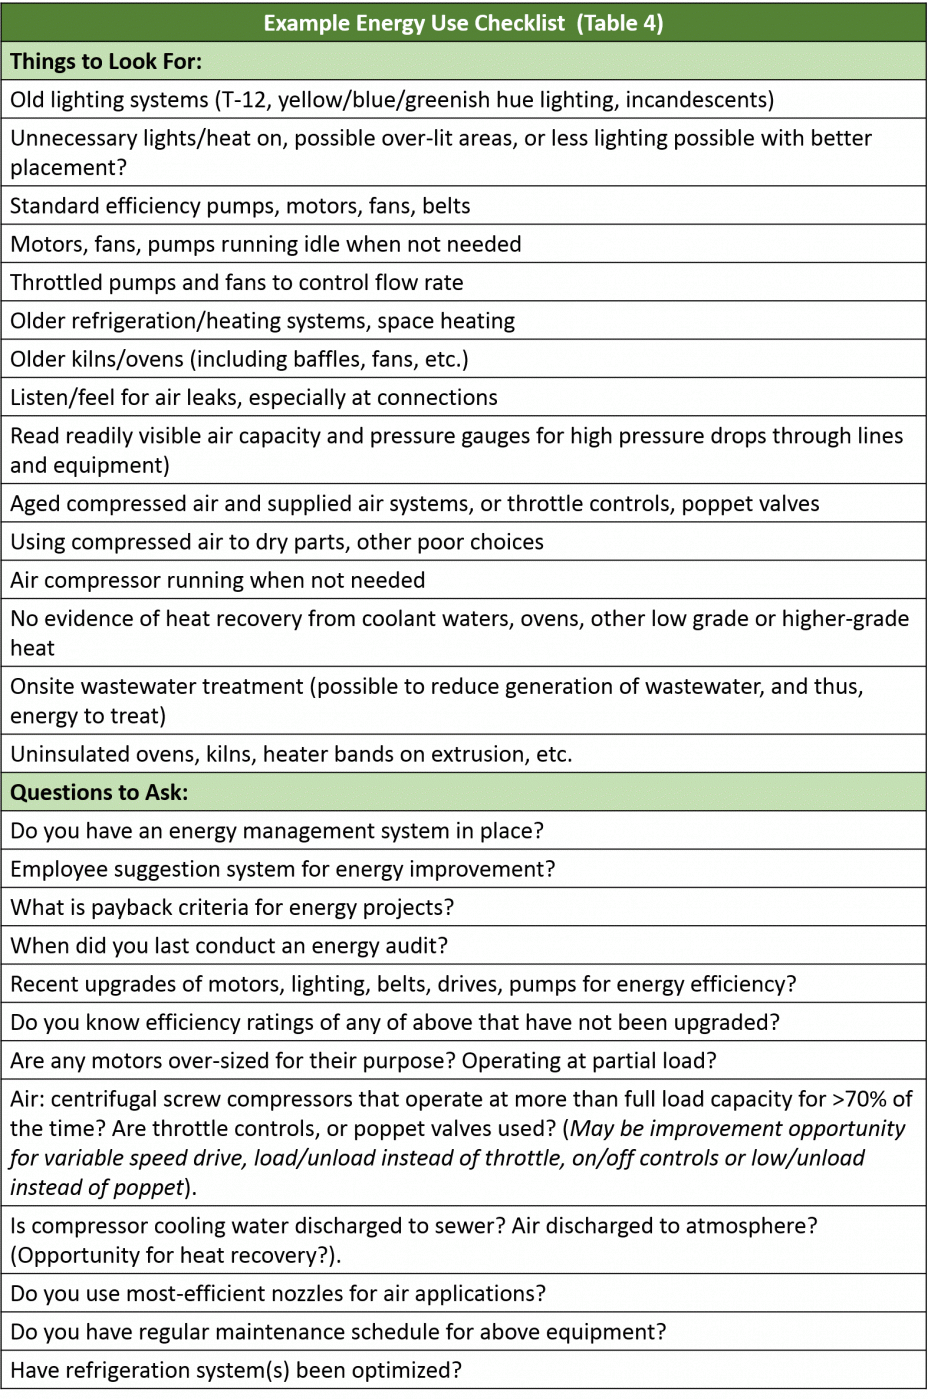 Example Energy Use Checklist (Table 4)